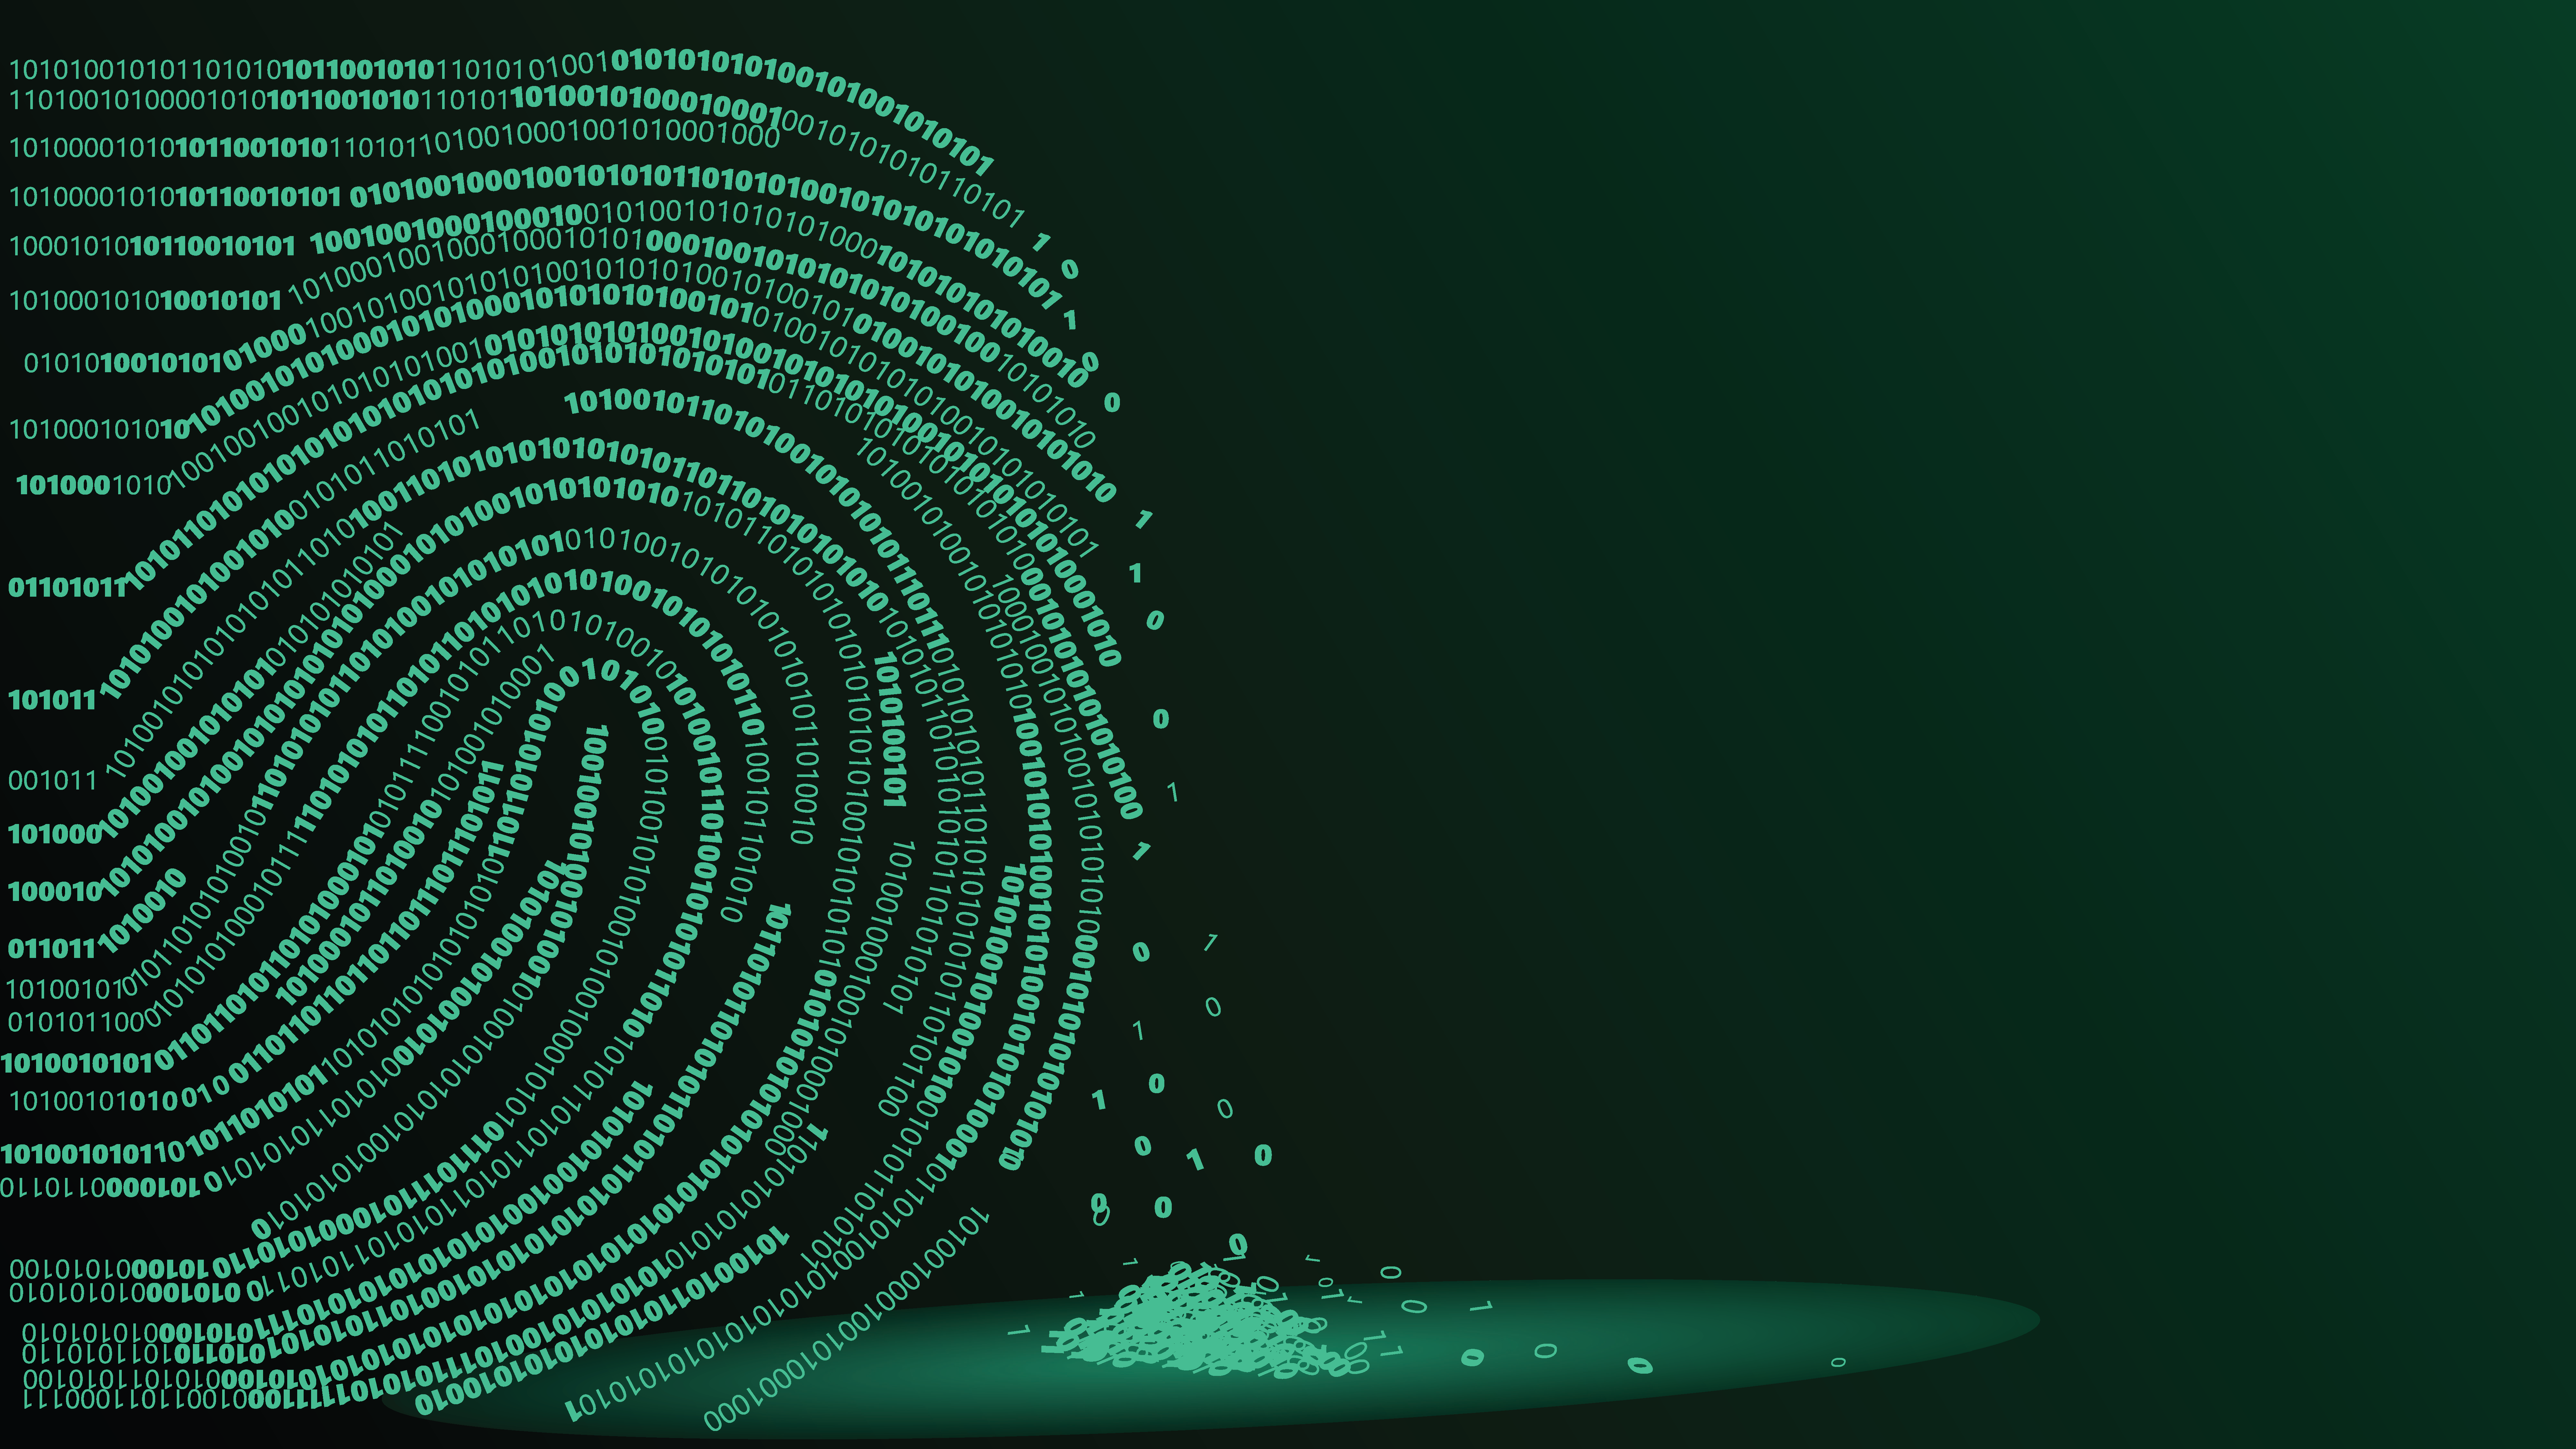 Digital fingerprint illustration depicting data and its relationship to identity security.